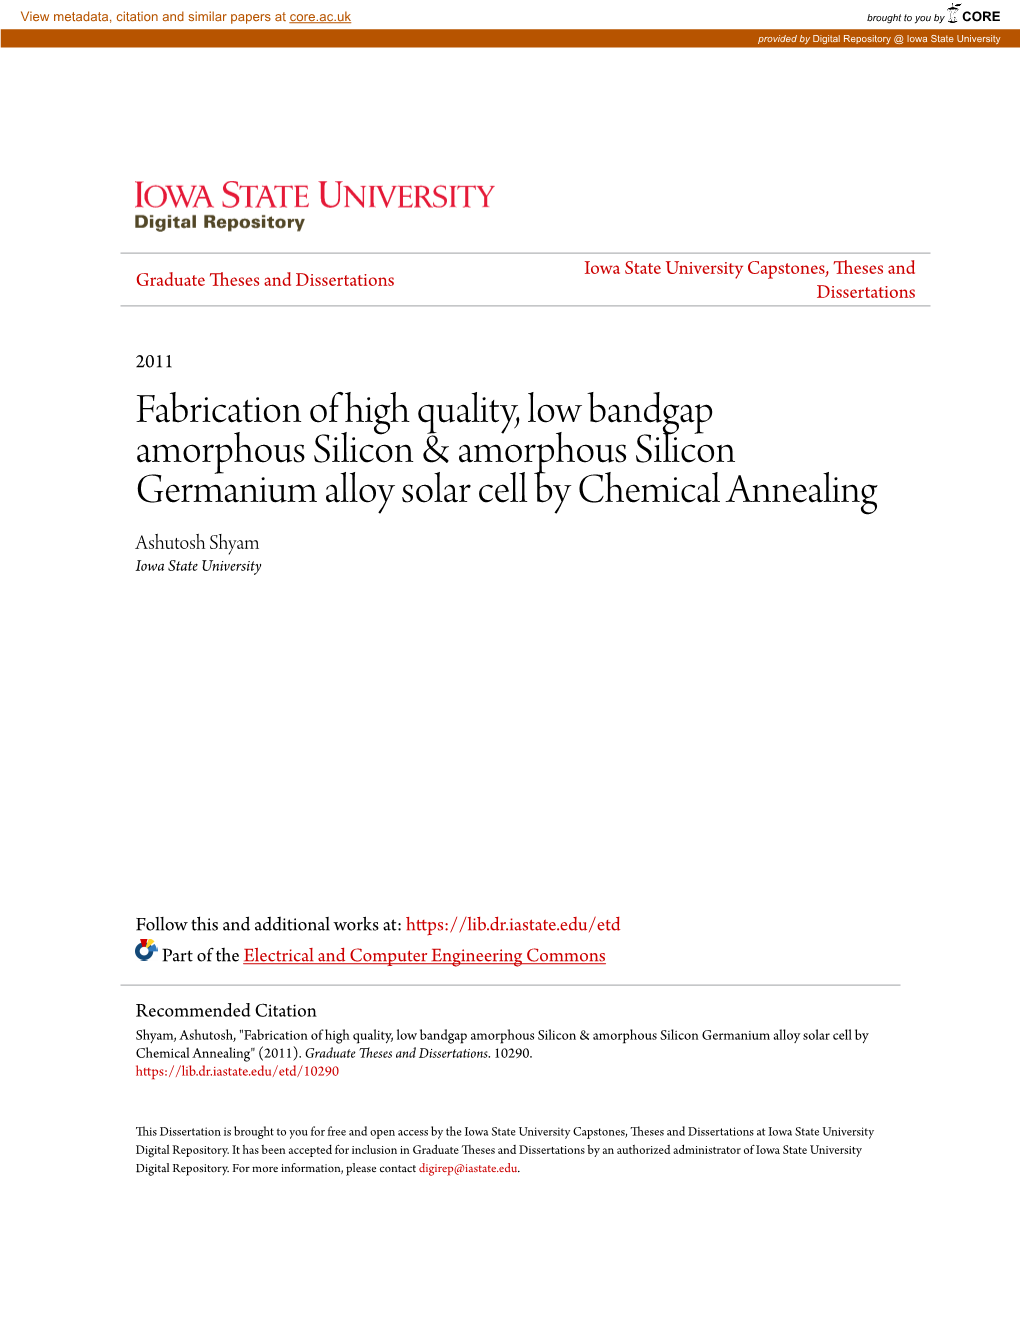 Fabrication of High Quality, Low Bandgap Amorphous Silicon & Amorphous Silicon Germanium Alloy Solar Cell by Chemical Annealing Ashutosh Shyam Iowa State University